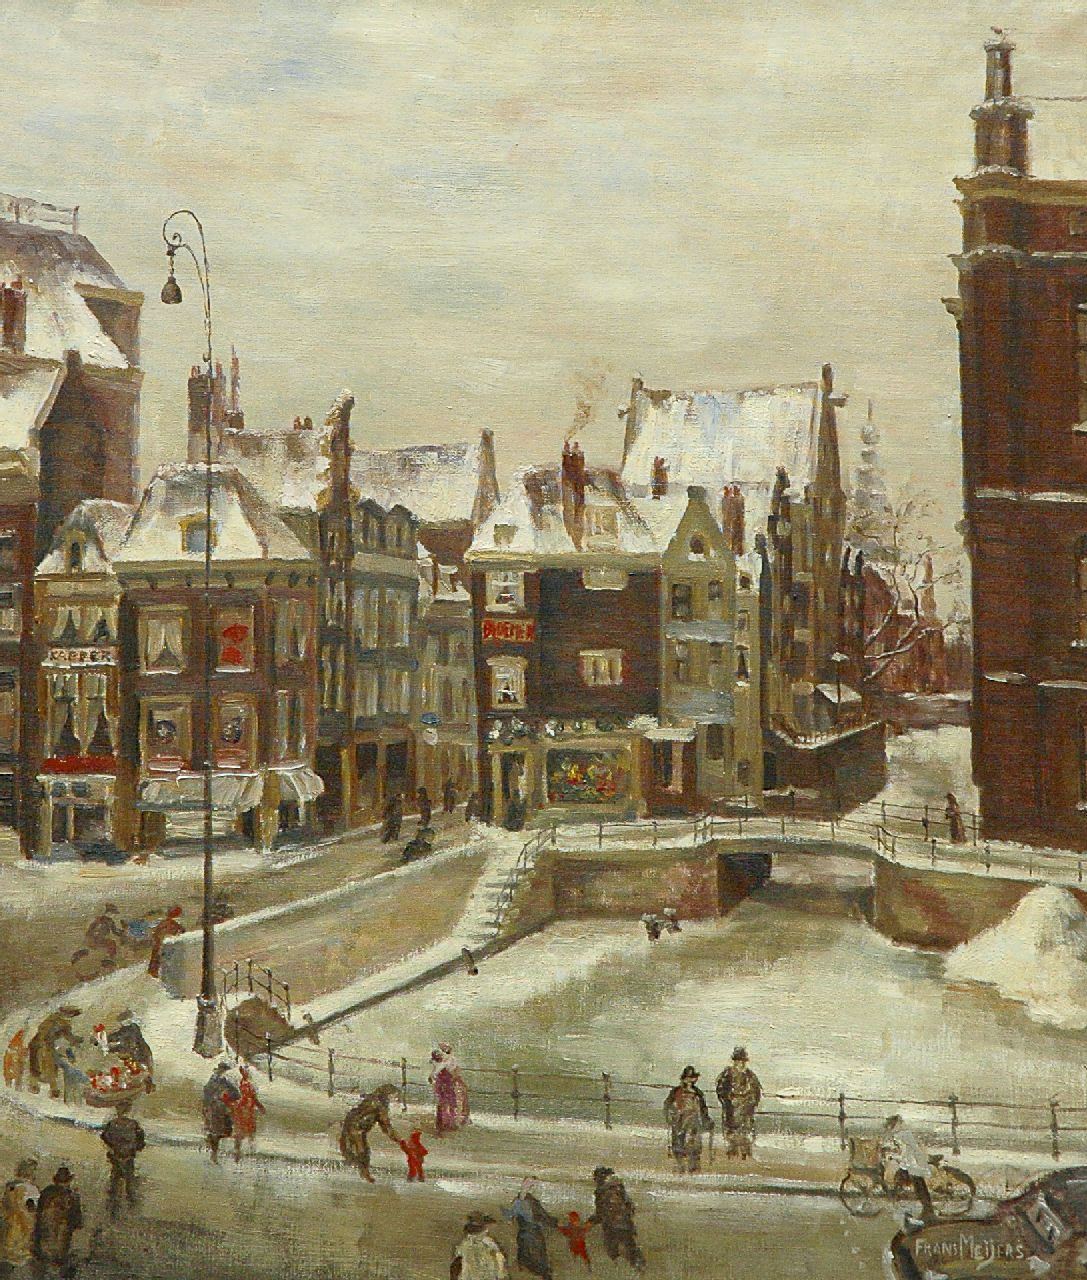 Frans Meijers | A view of  the Rokin in Amsterdam from the Arti building, Öl auf Leinwand, 70,1 x 60,1 cm, signed l.r.